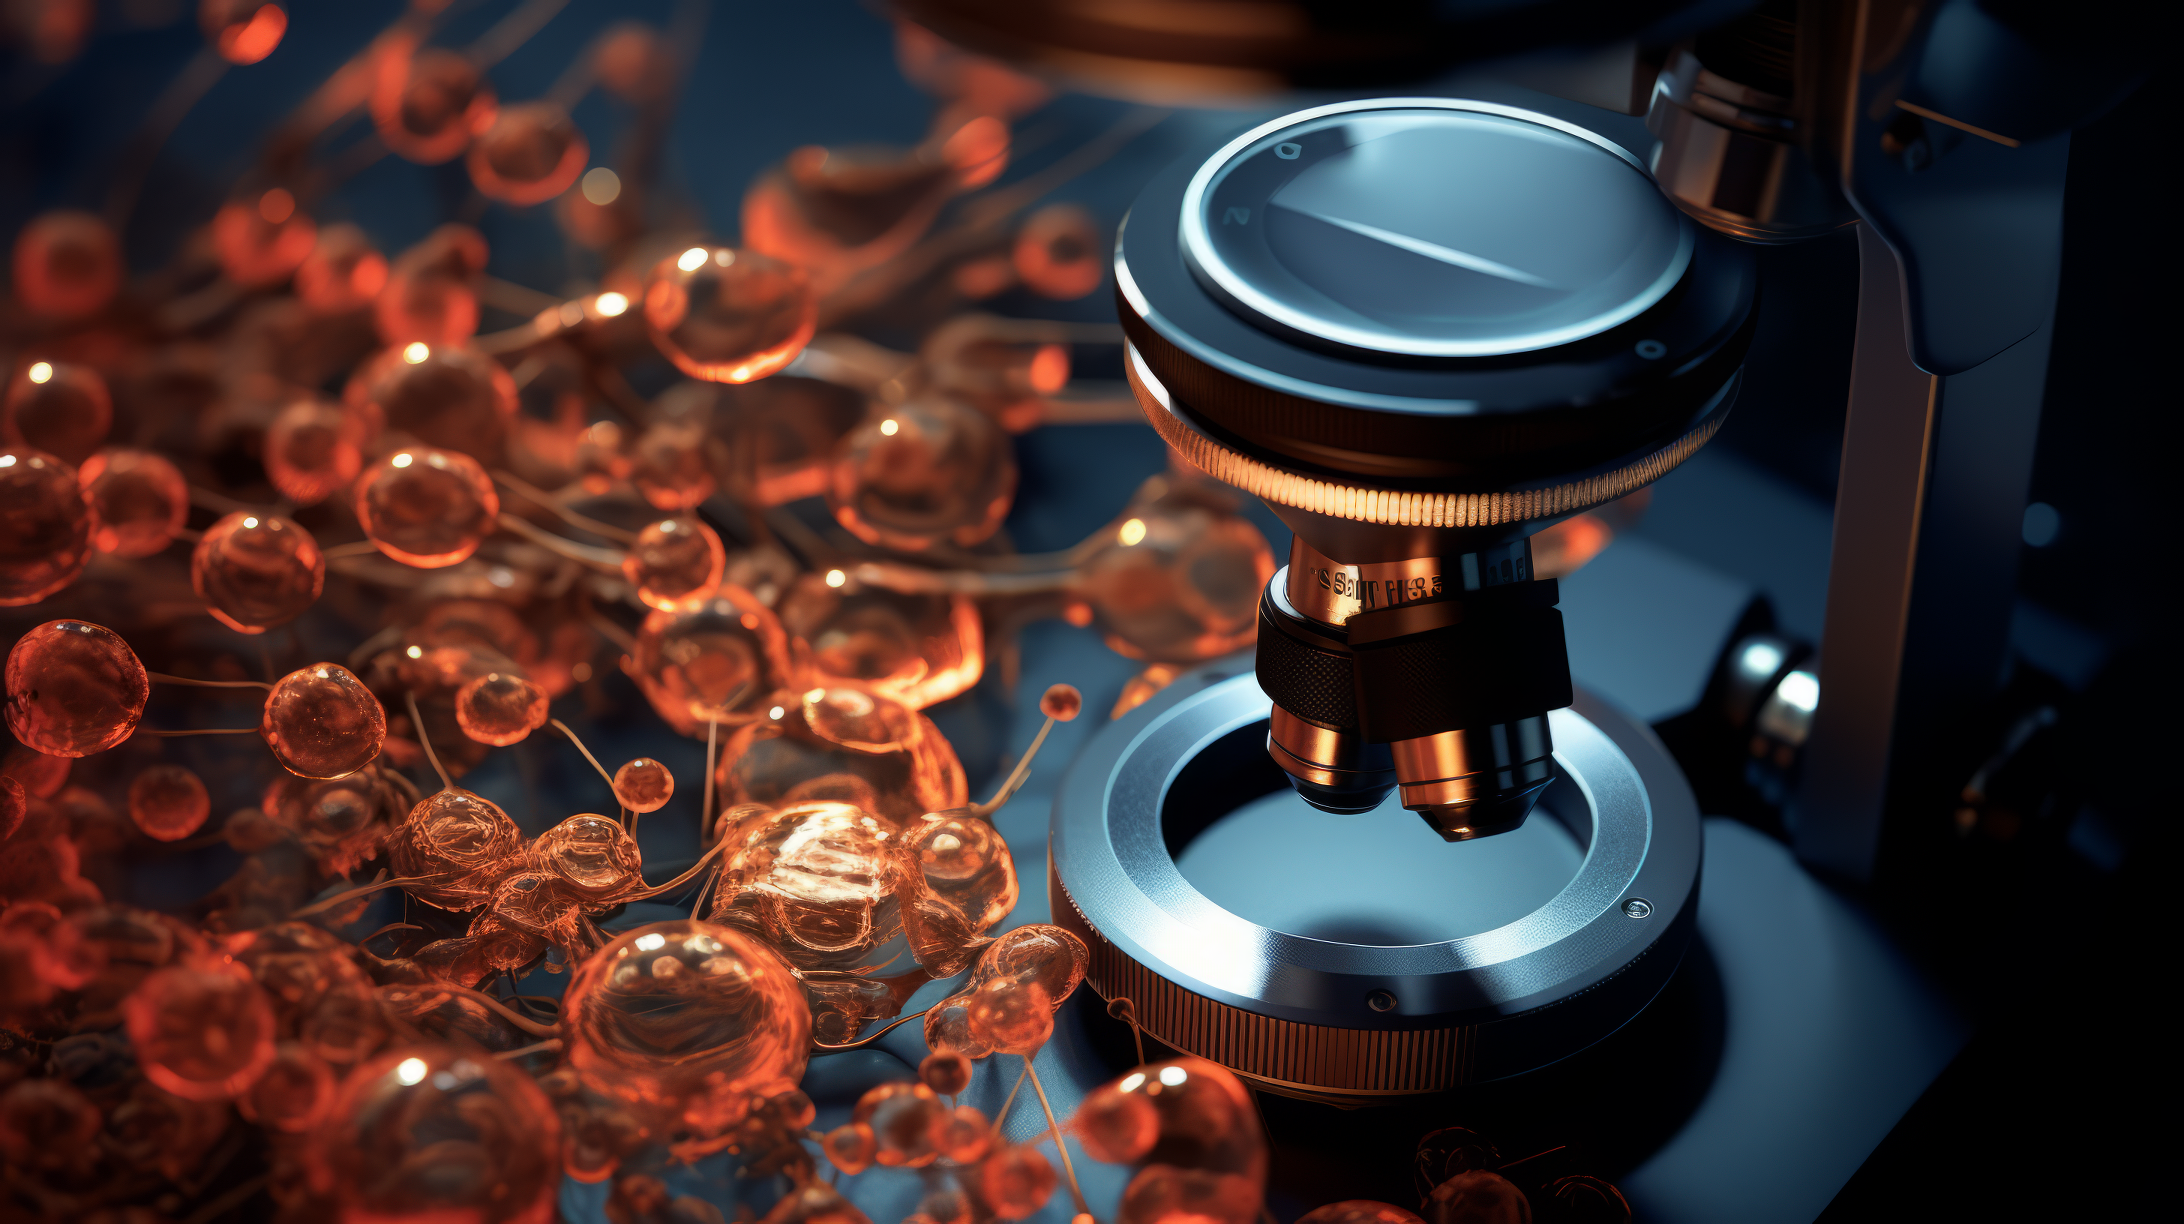 HD wallpaper featuring a close-up view of a microscope with illuminated cells in the background, perfect for medical or scientific-themed desktop backgrounds.